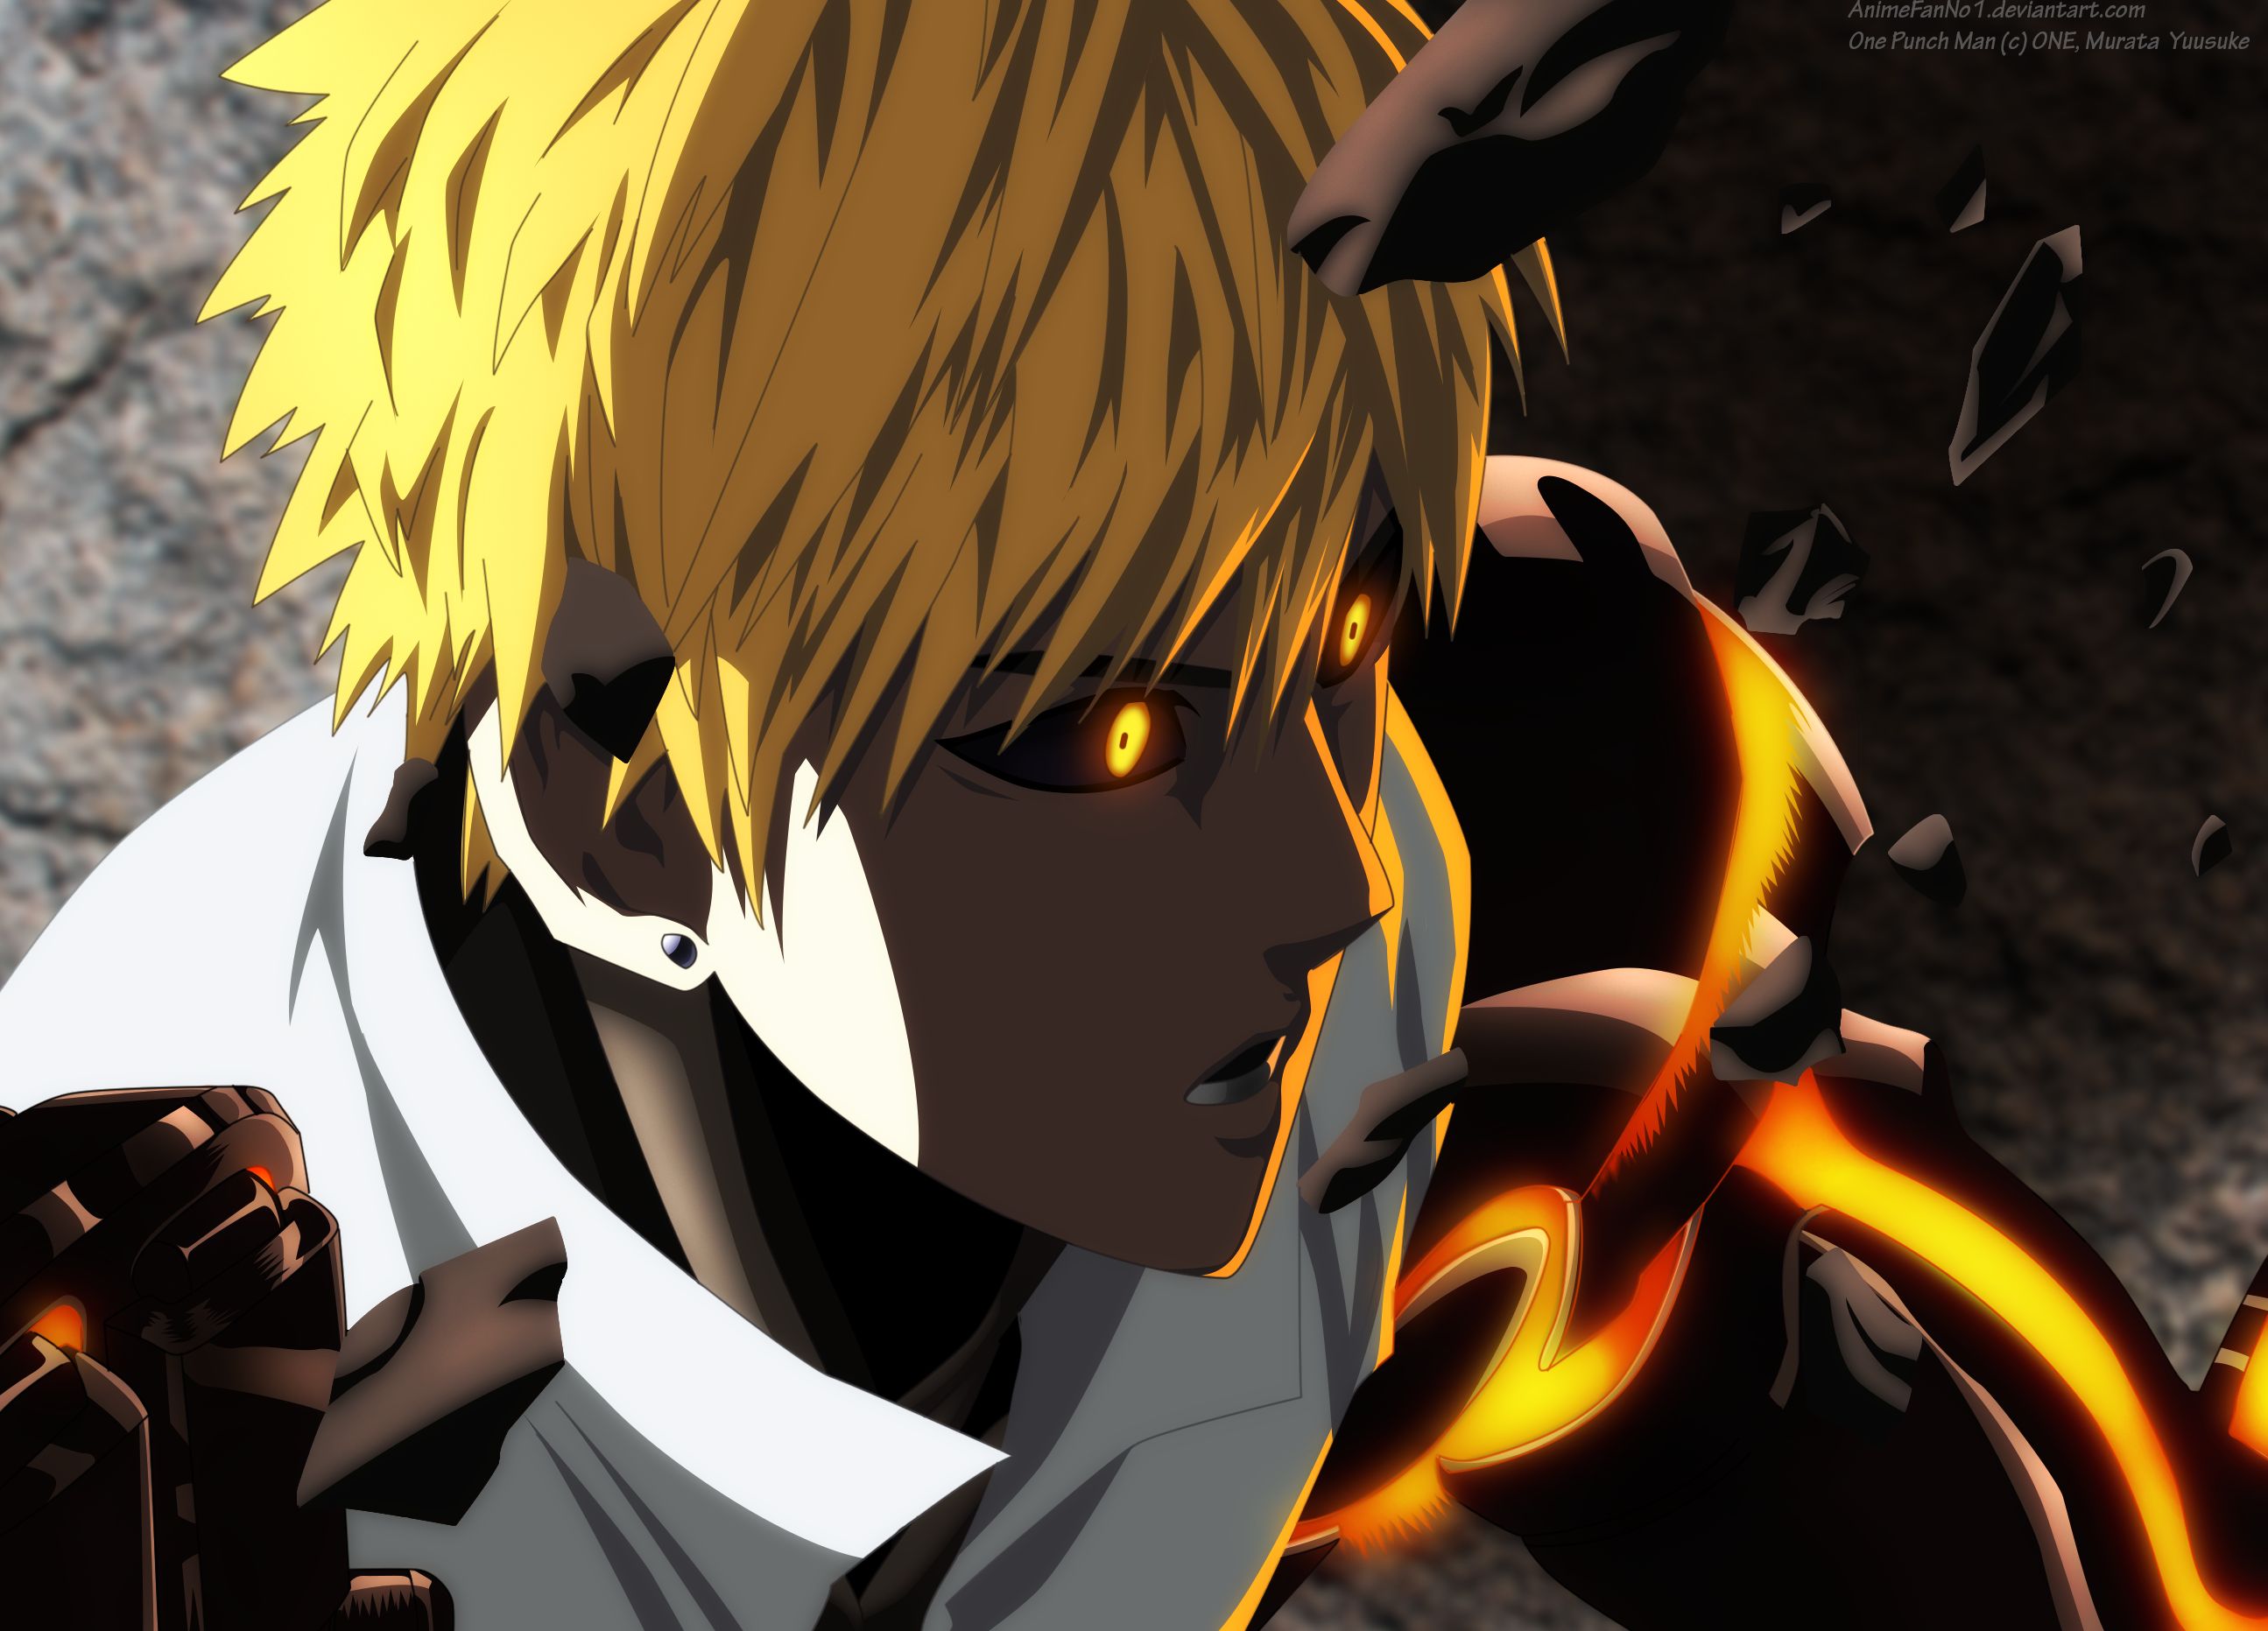 one punch man, anime, genos (one punch man) wallpaper for mobile